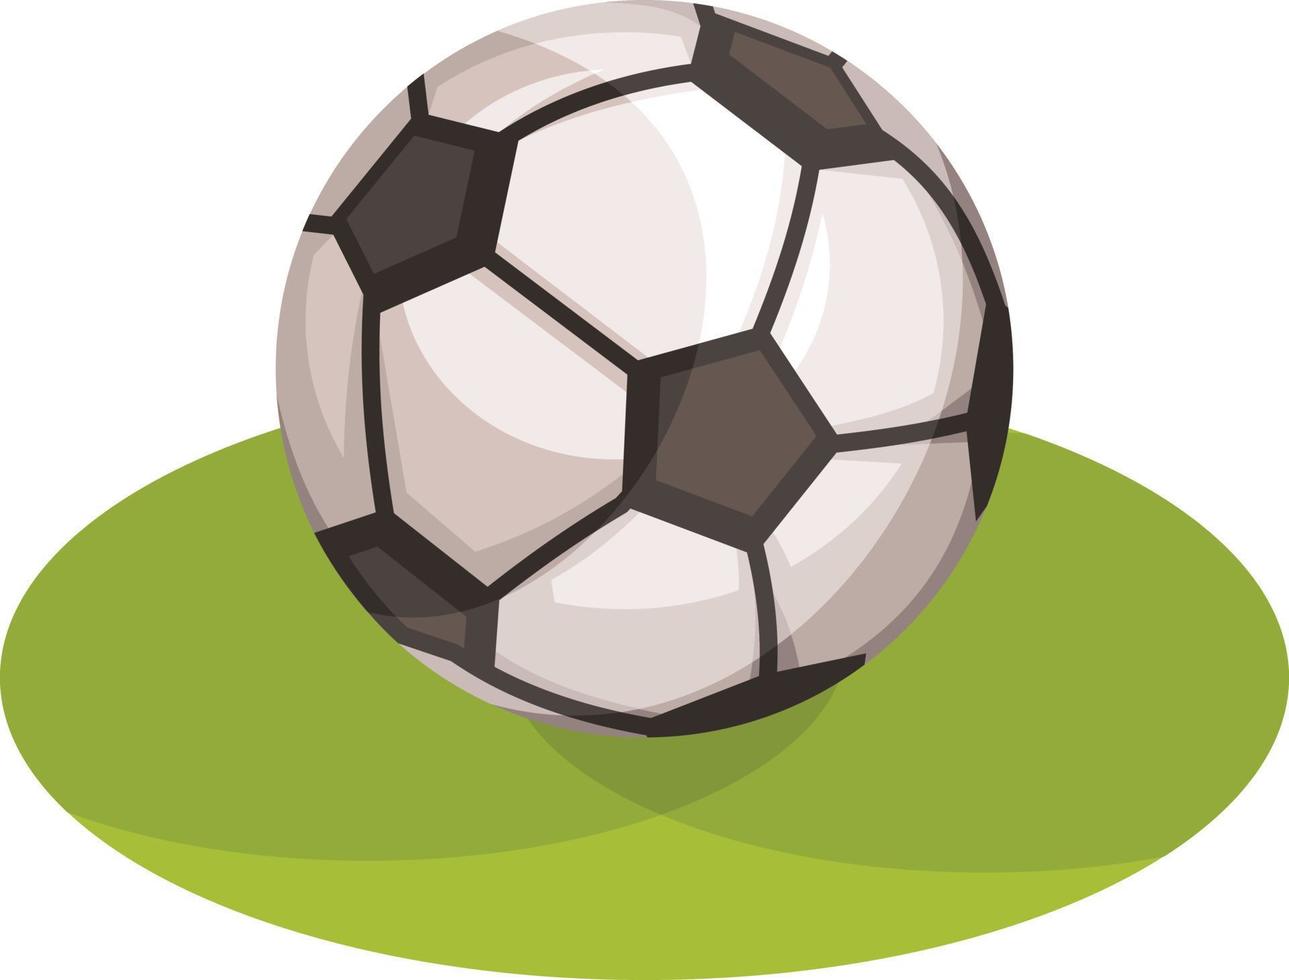 Vector Image Of A Soccer Ball On The Football Field